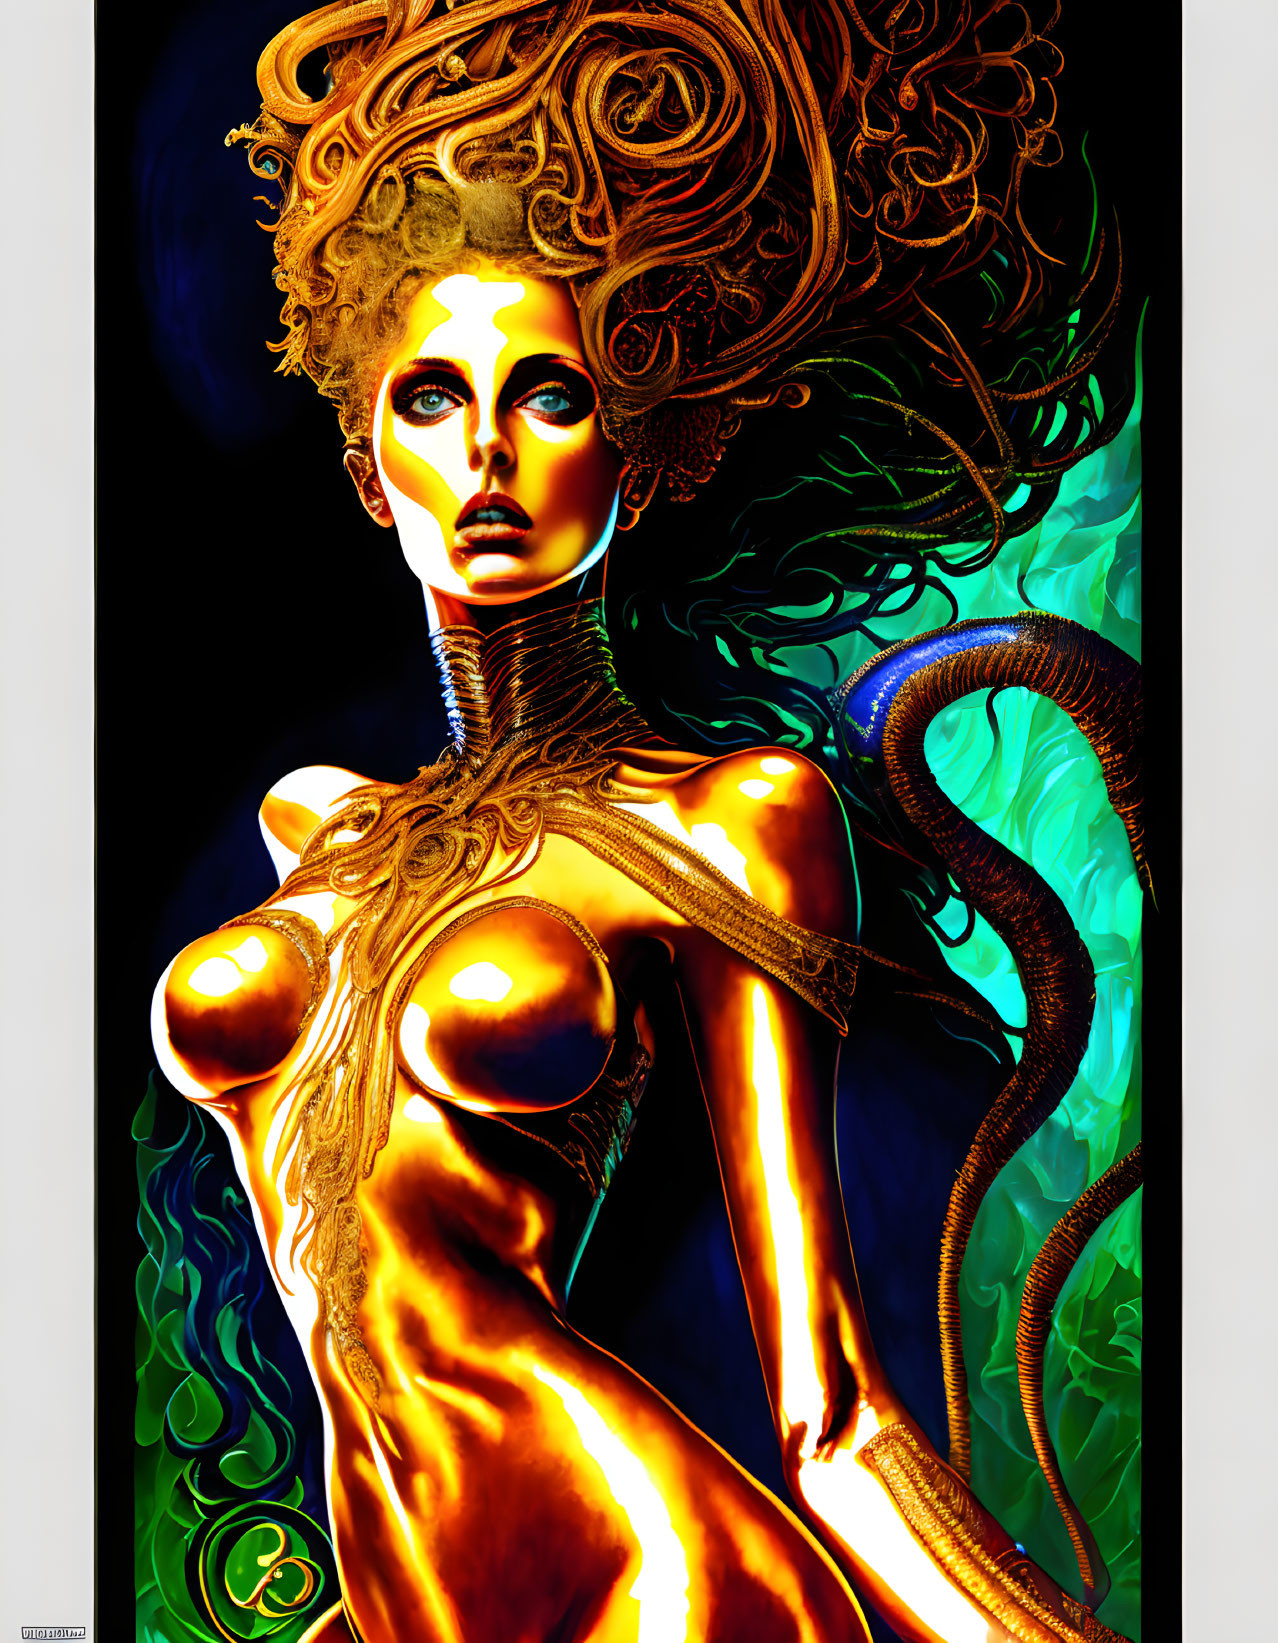 Colorful artwork: woman with golden skin and serpent against dark background